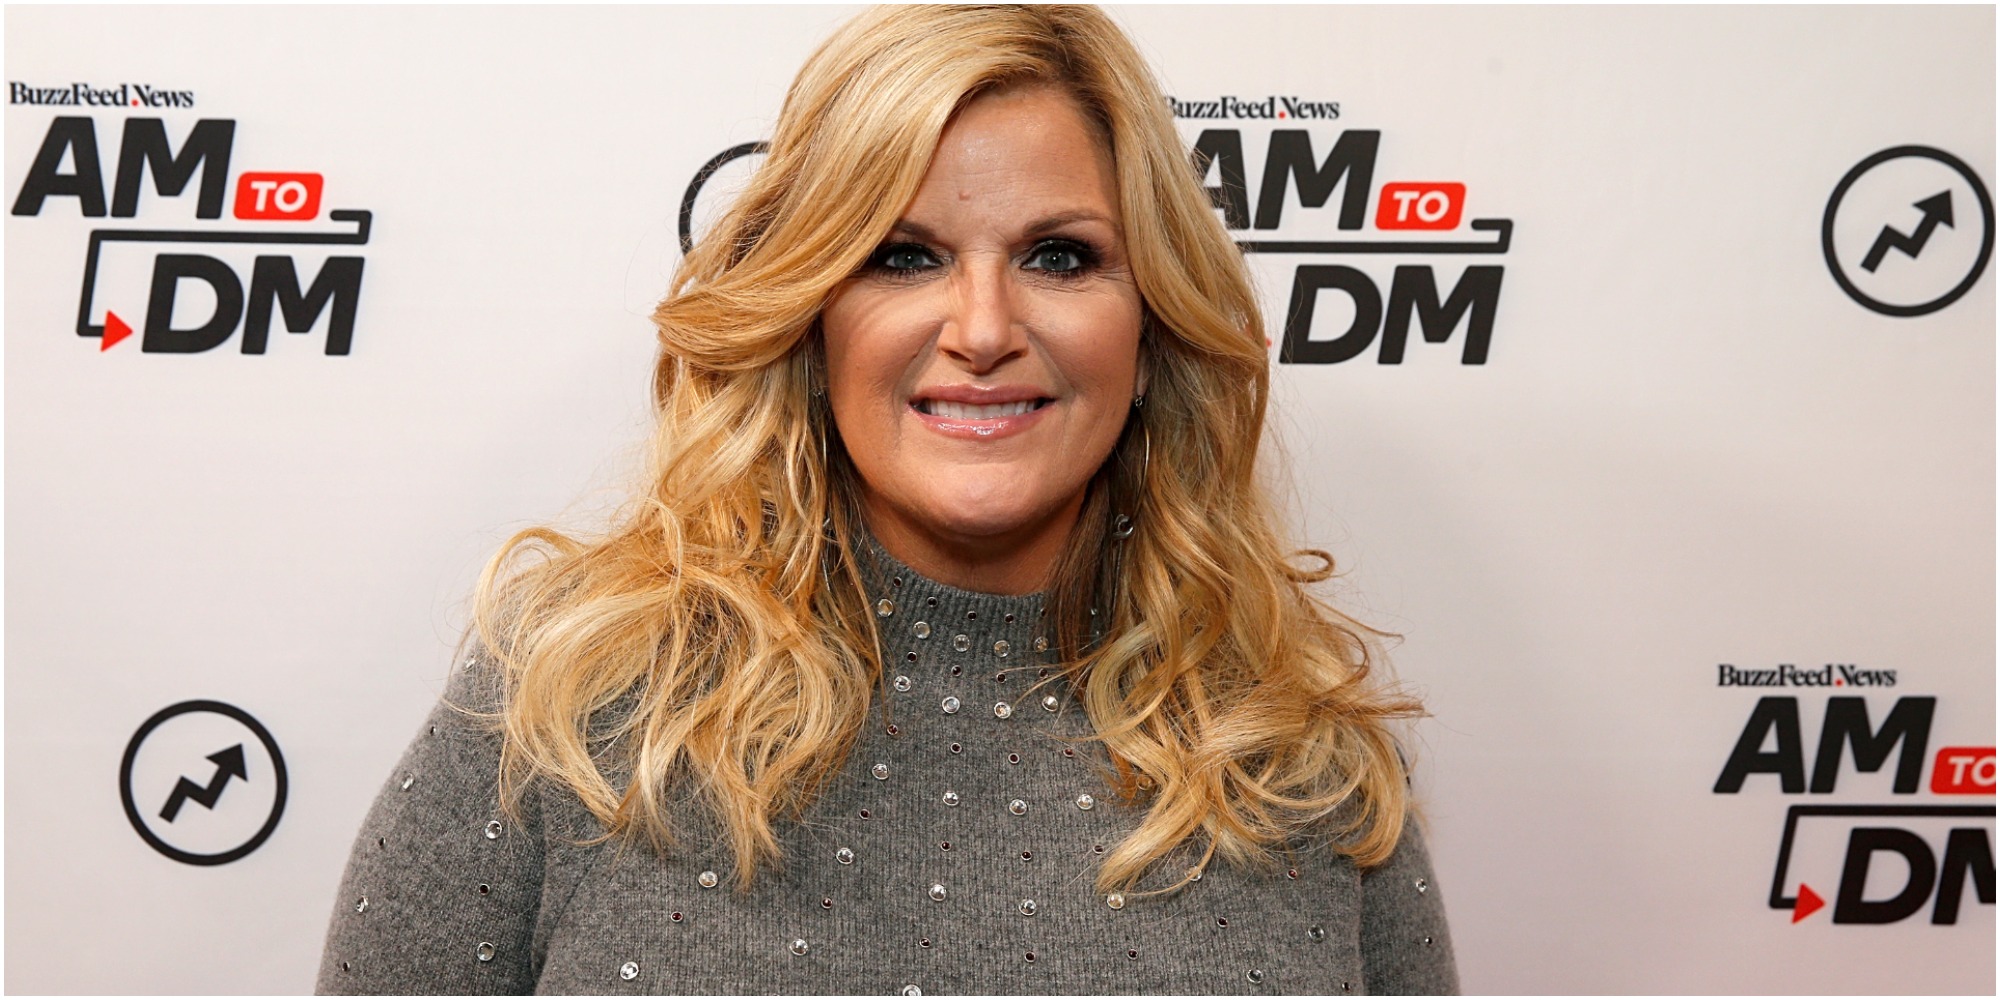 Trisha Yearwood stands in a gray sweater and poses for a photographer.